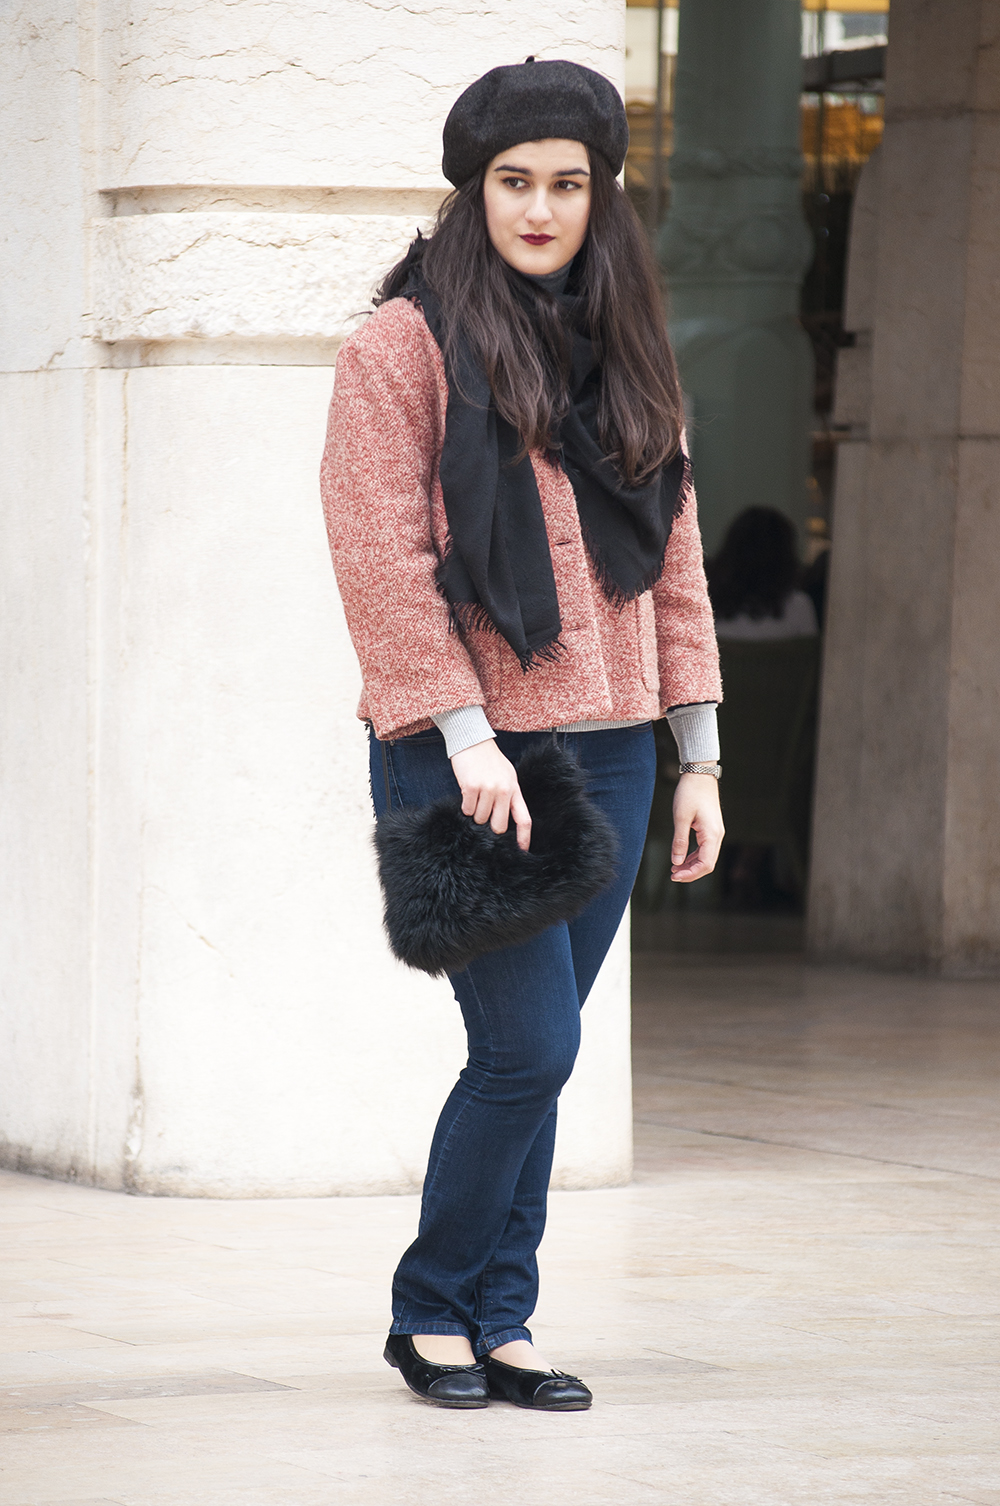 5 outfit ideas running late, fashion blogger advice, how wear jeans blazer flats, valencia spain blog something fashion